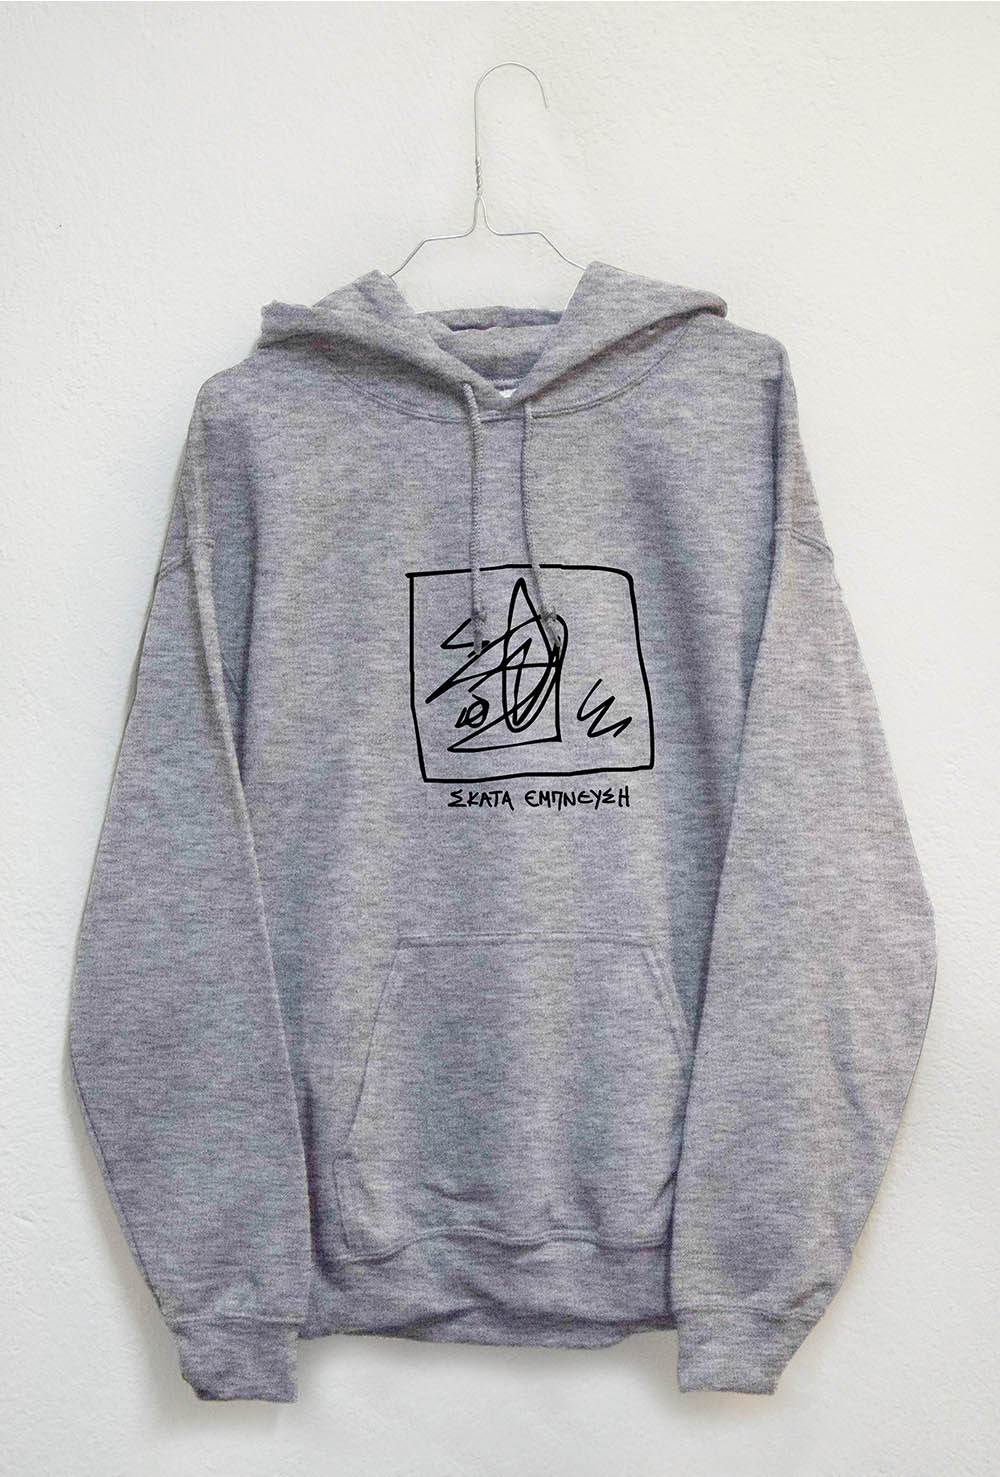 Subworks grey hoodie About shitty inspiration